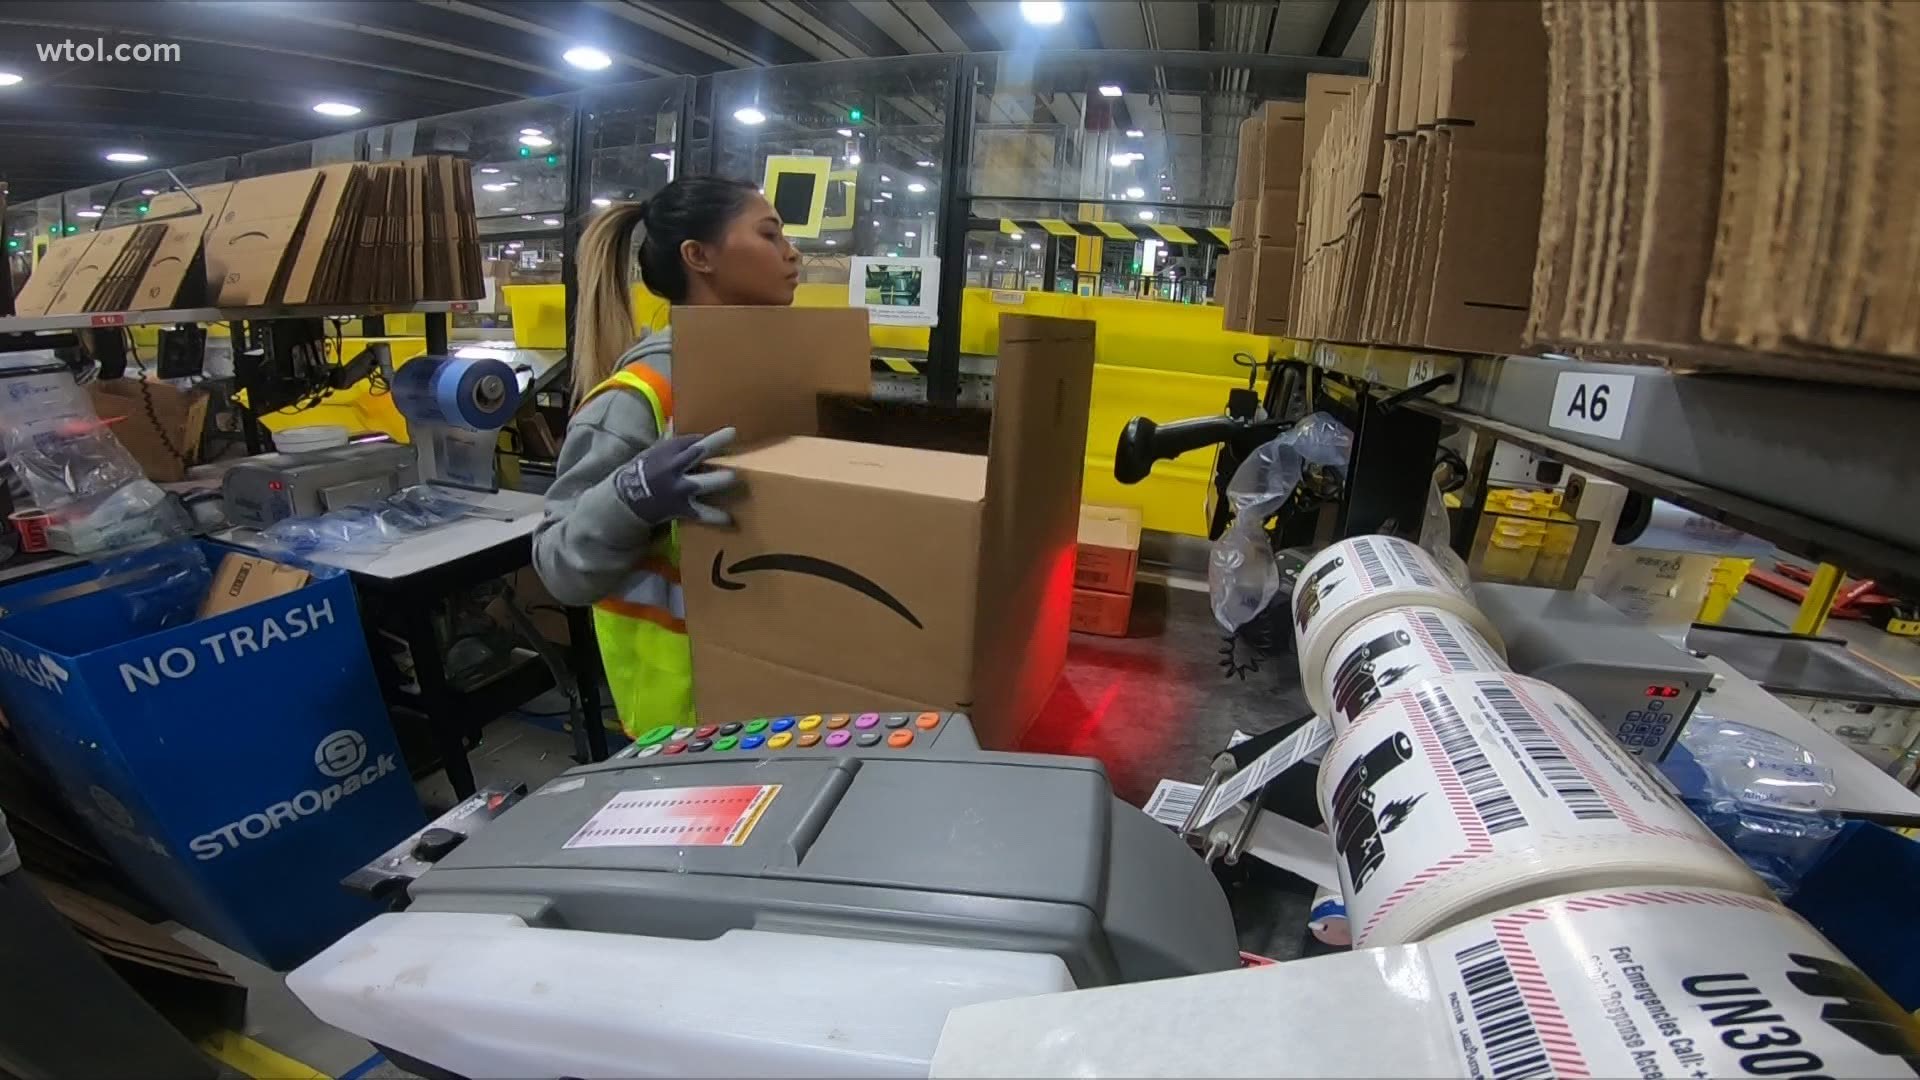 While the methods aren't necessarily new, the company's lofty goal is. Amazon is aiming to cut employee injuries in half by 2025.